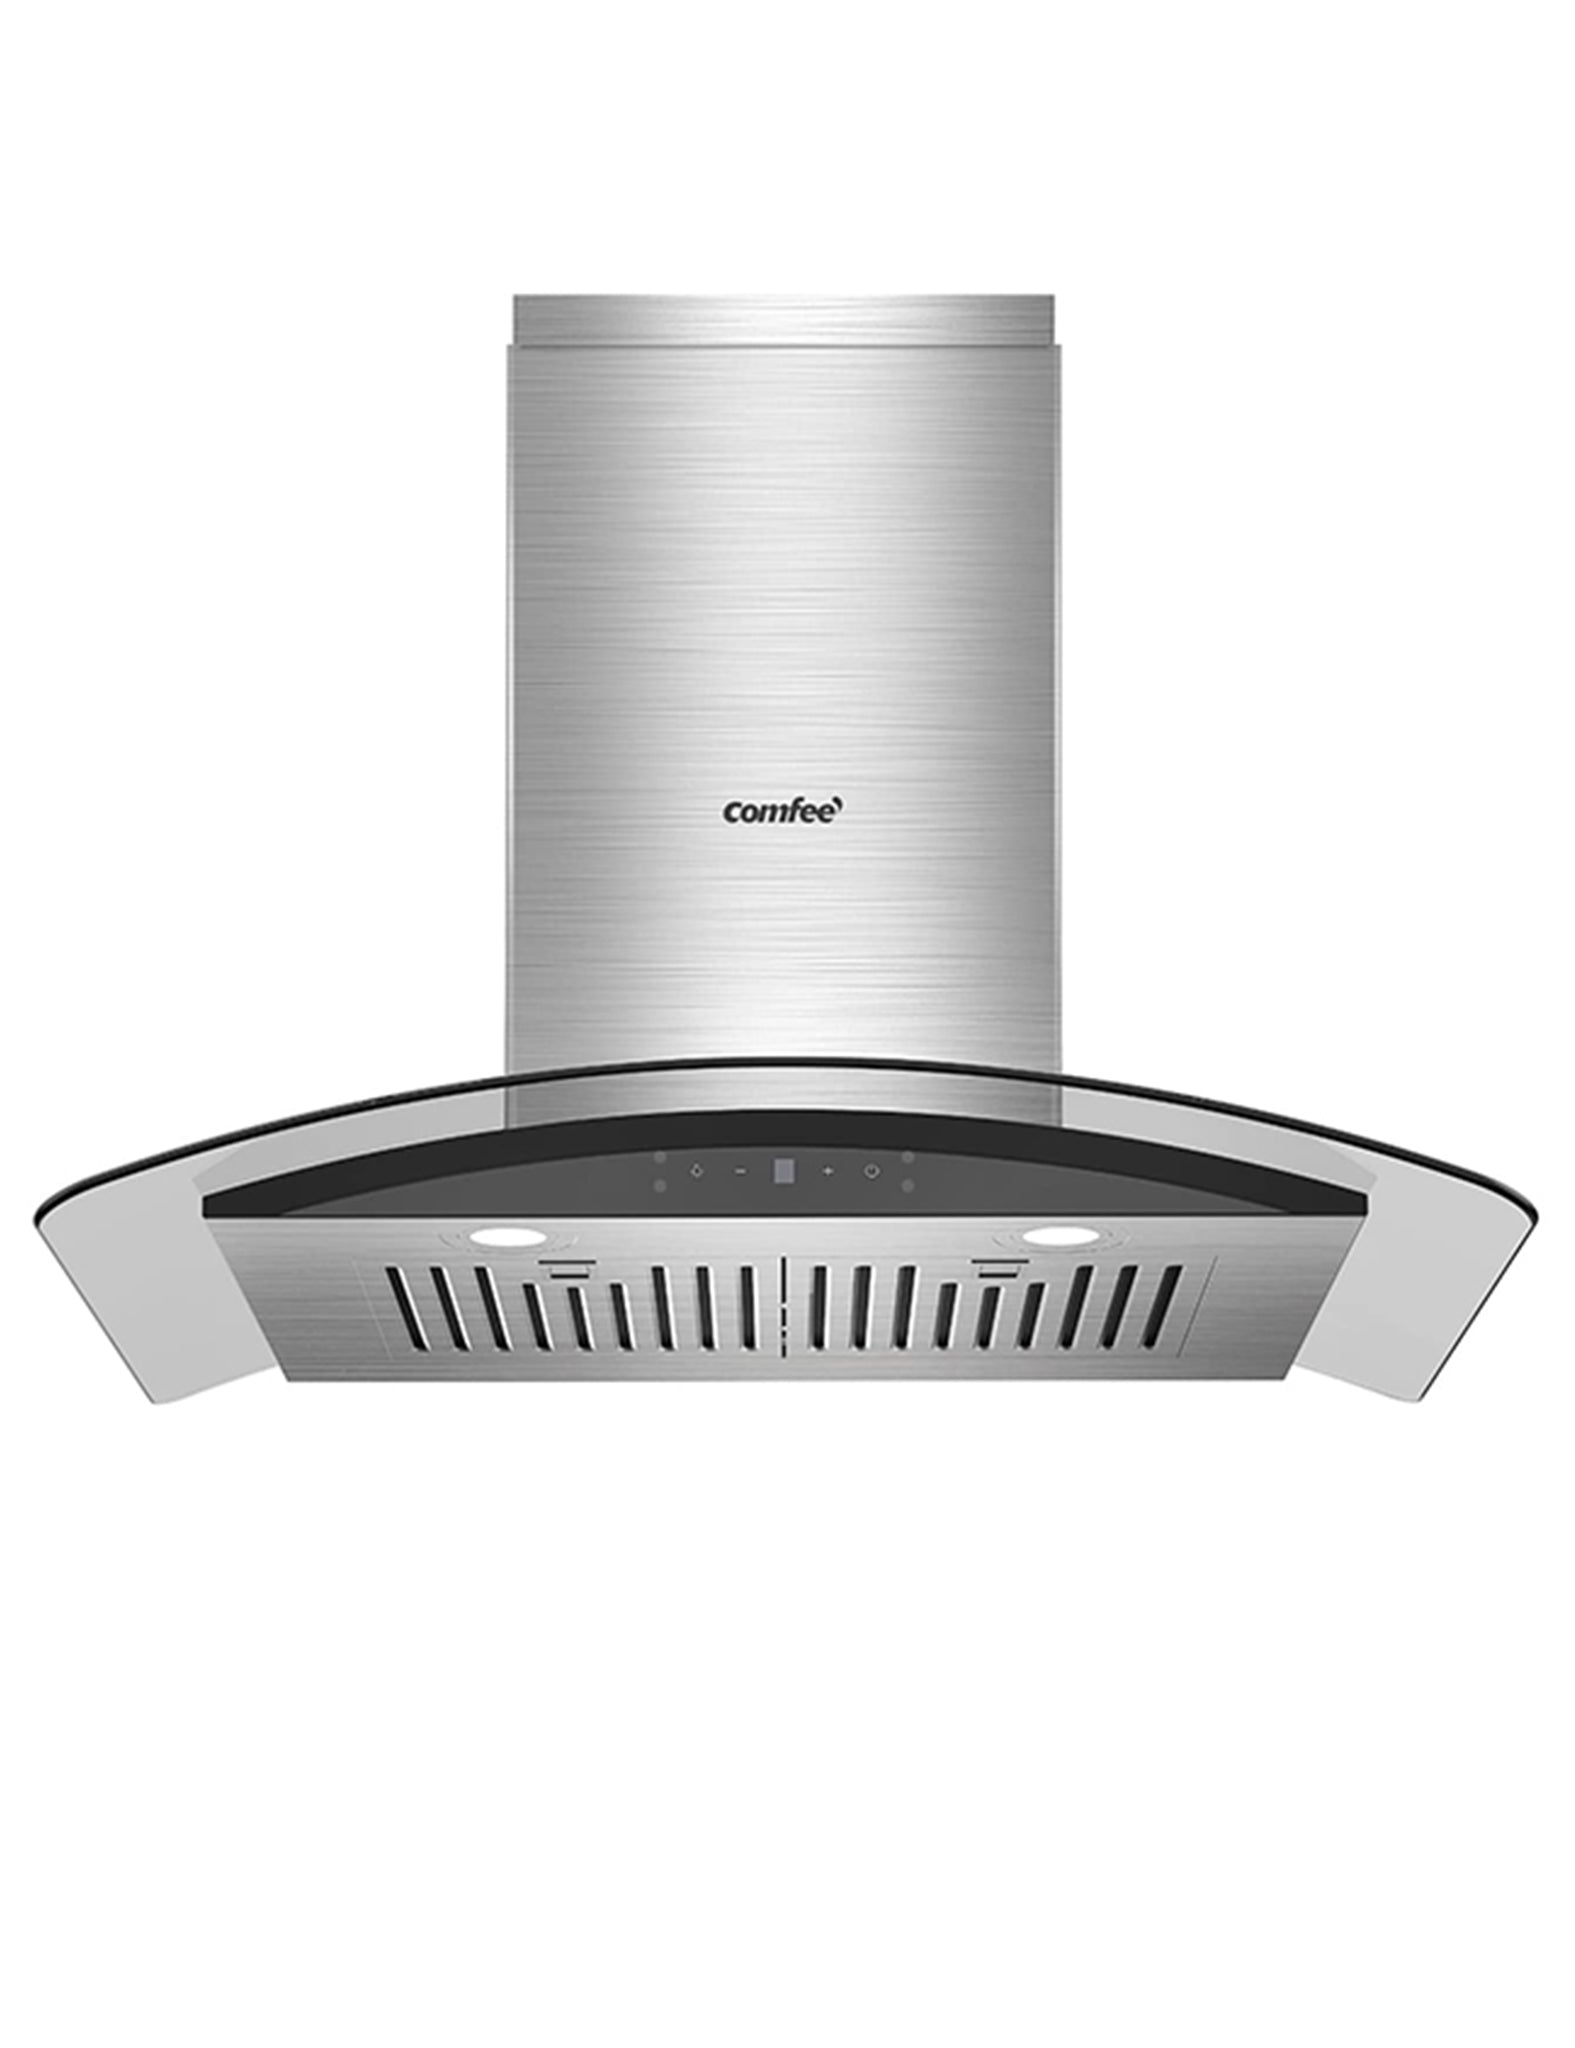 comfee range hood with curved glass and gesture sensing control design